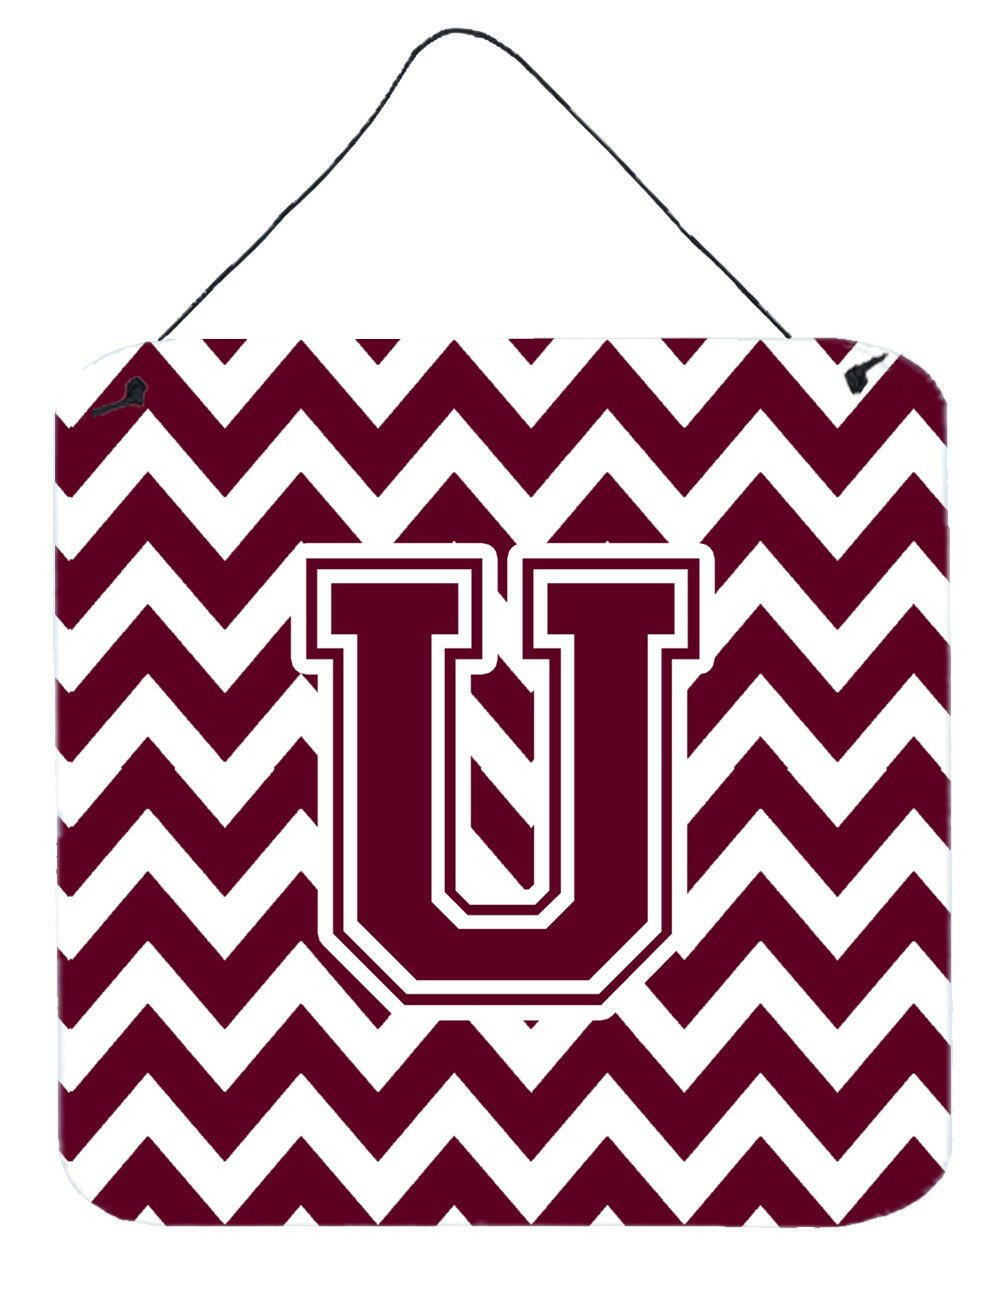 Letter U Chevron Maroon and White  Wall or Door Hanging Prints CJ1051-UDS66 by Caroline's Treasures